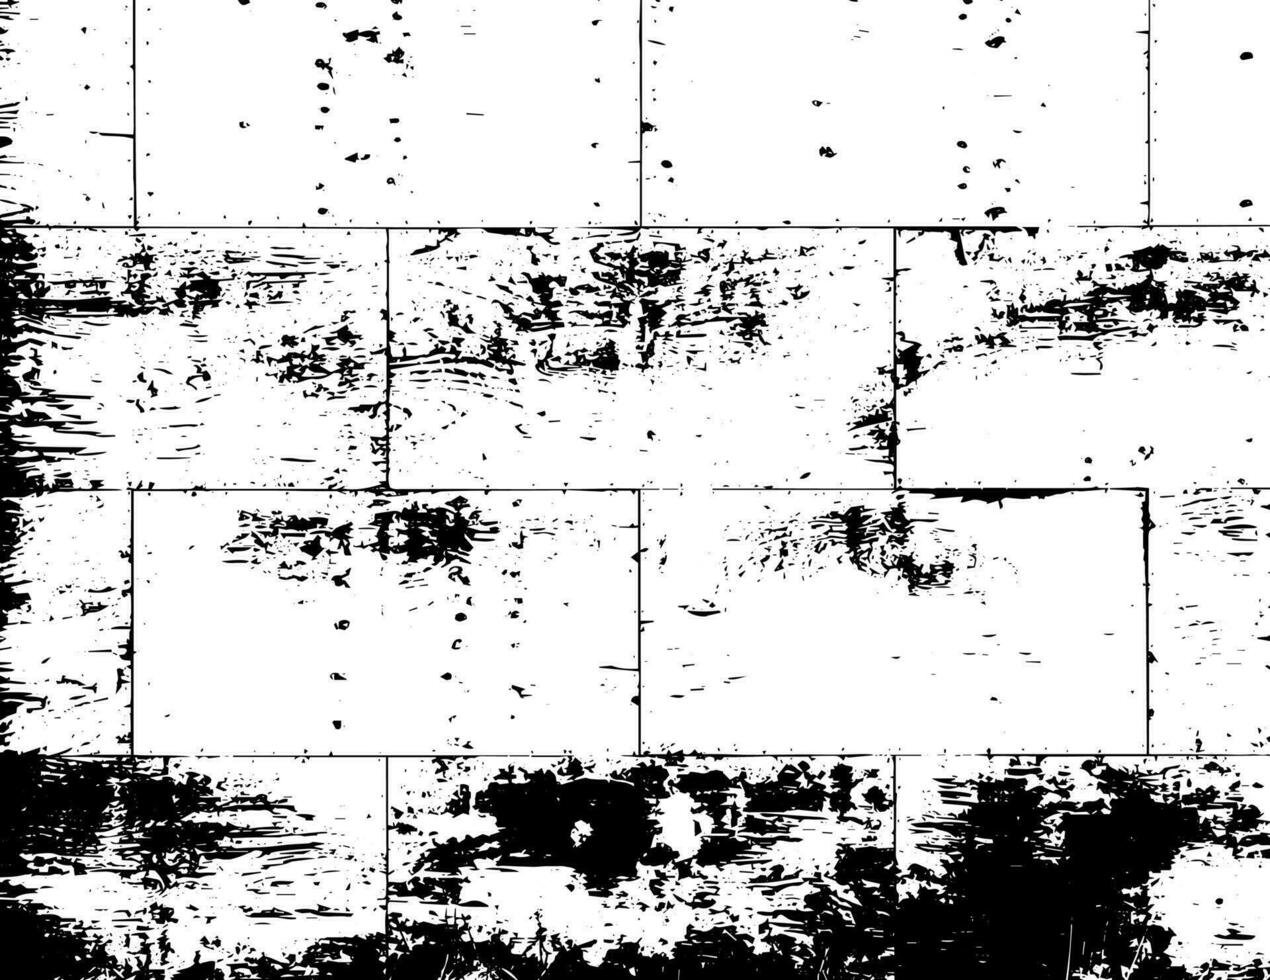 Rustic grunge vector texture with grain and stains. Abstract noise background. Weathered surface.